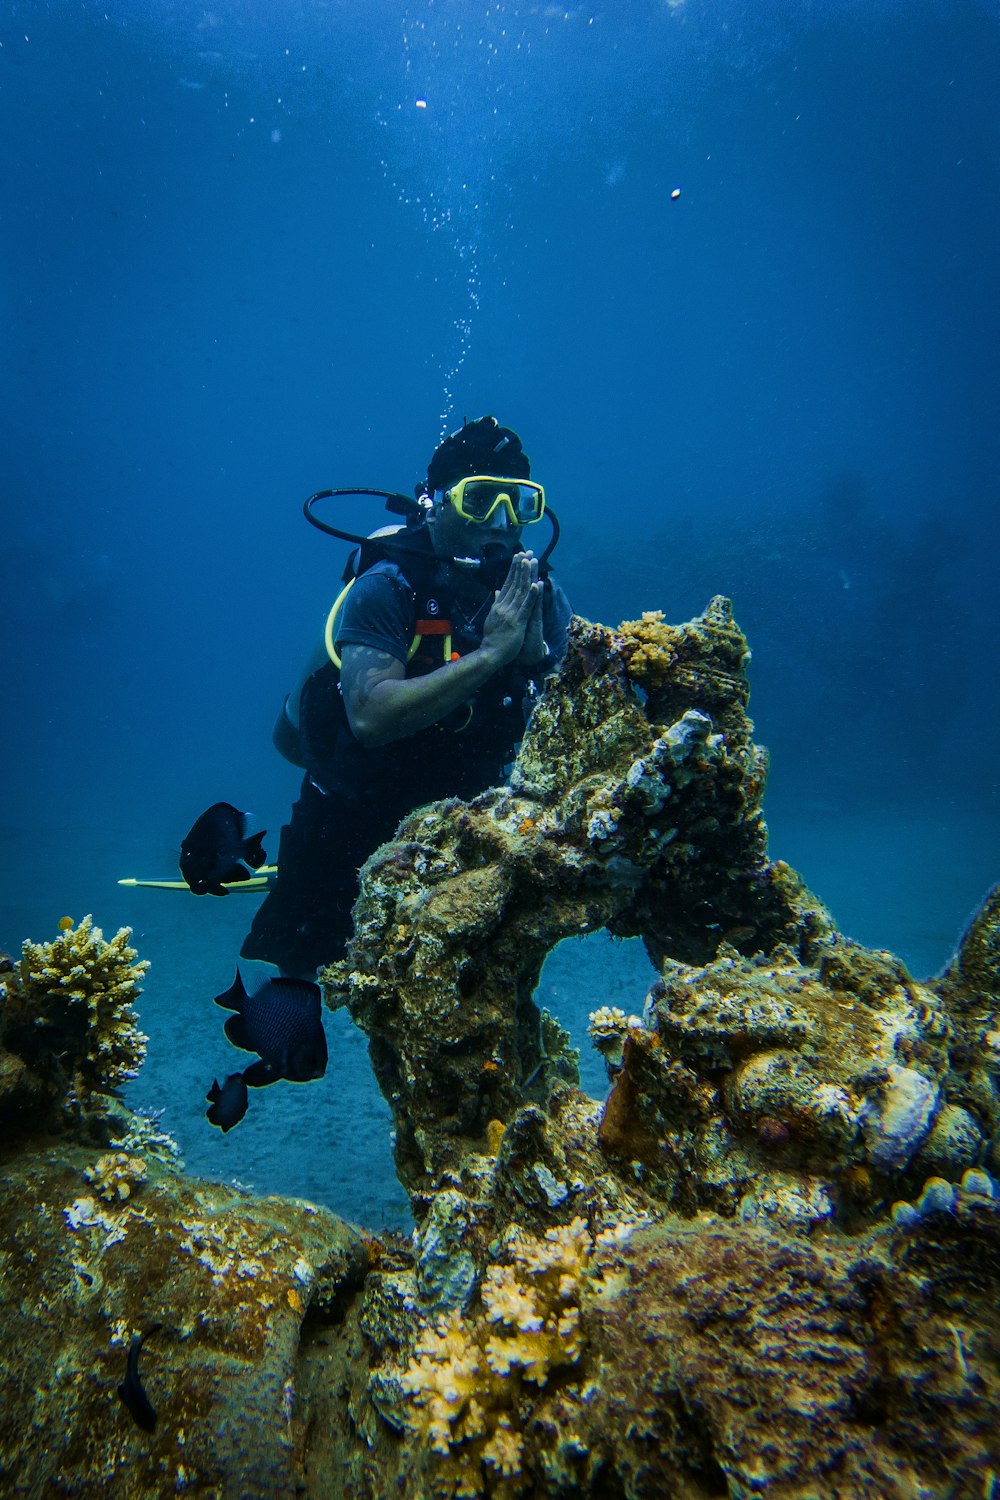 man in black and white diving suit wearing black goggles and black goggles